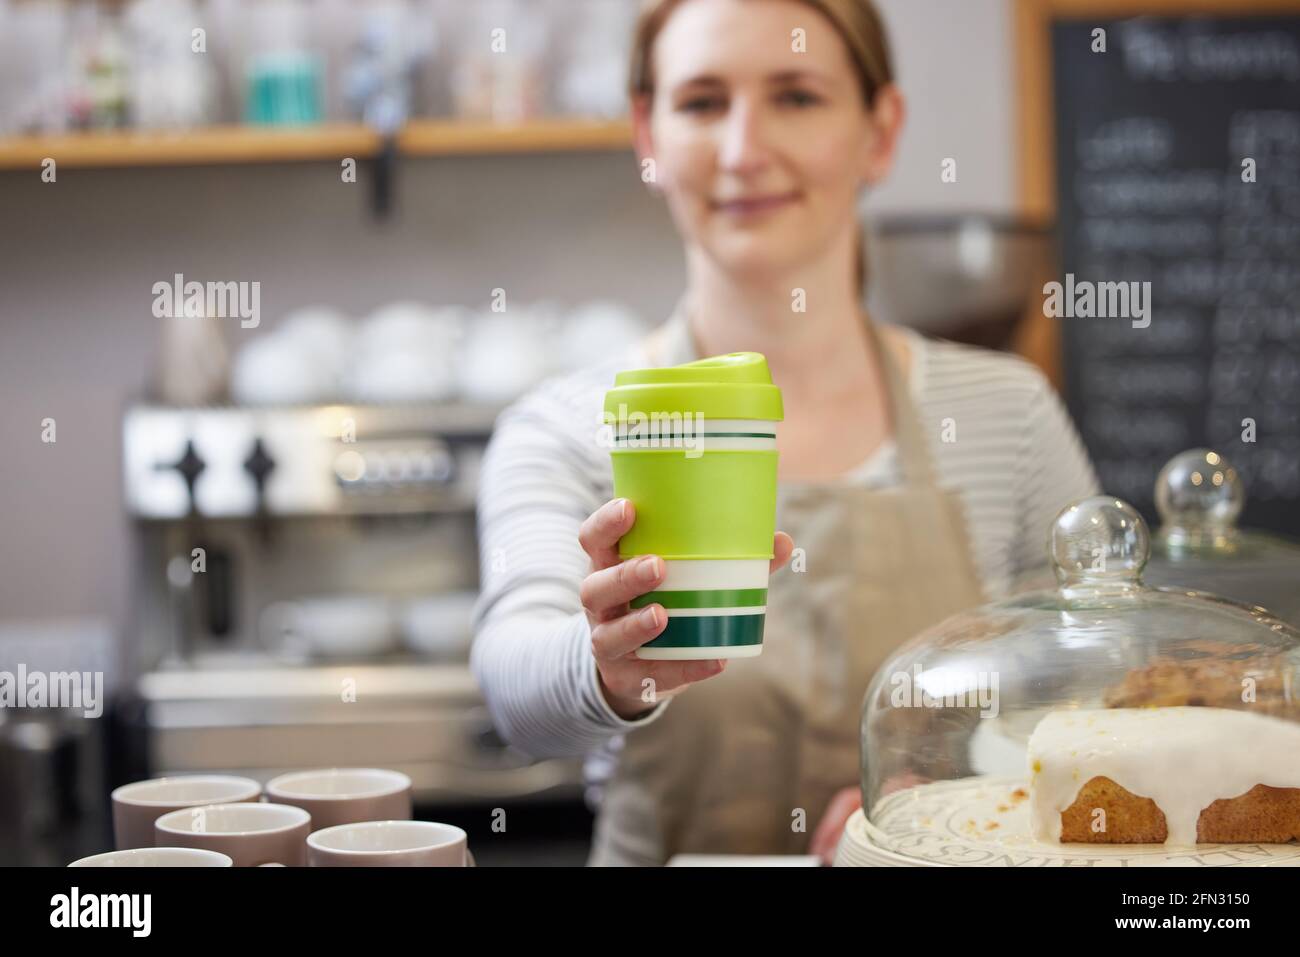 Female Worker in Cafe Serving Coffee In Sustainable Reusable Cup Stock Photo